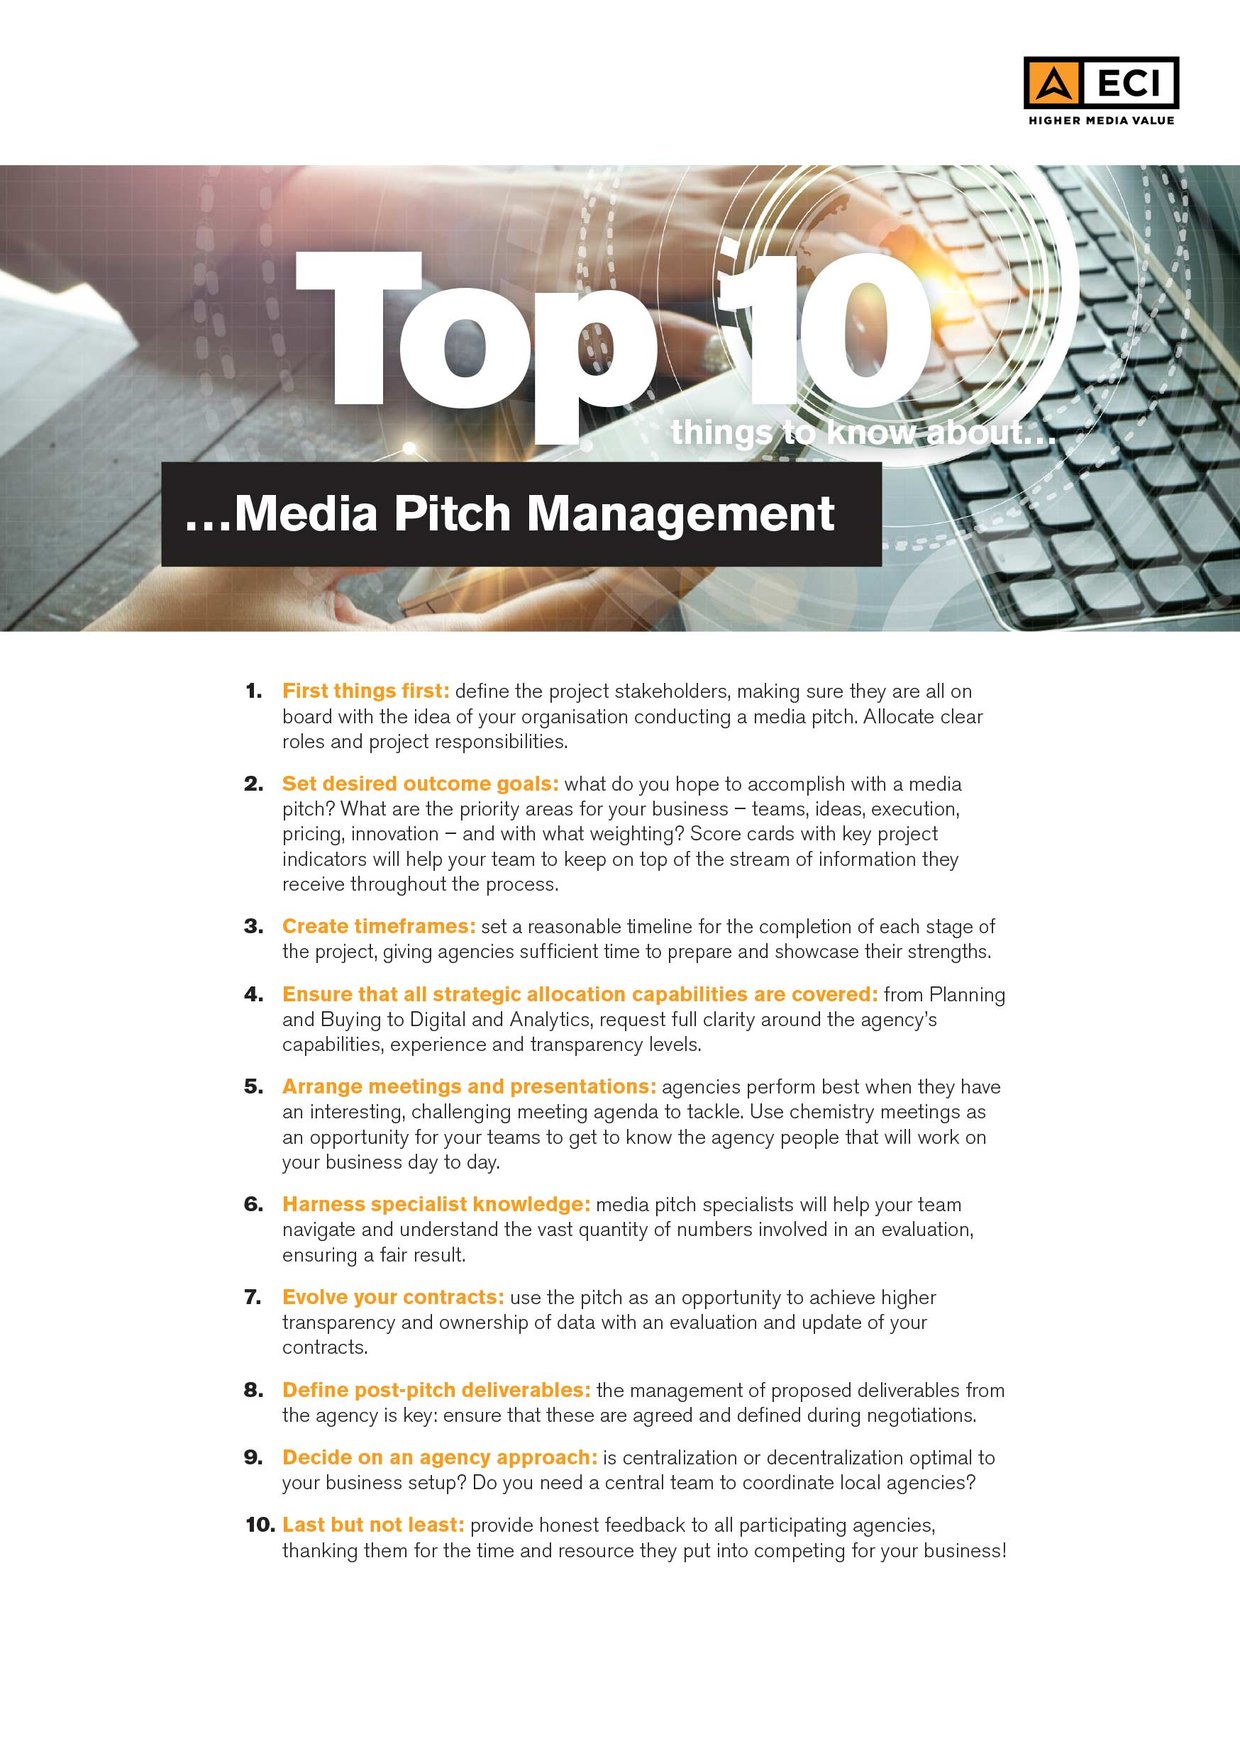 Top-10_Media-Pitch-Management_Whitepaper-1